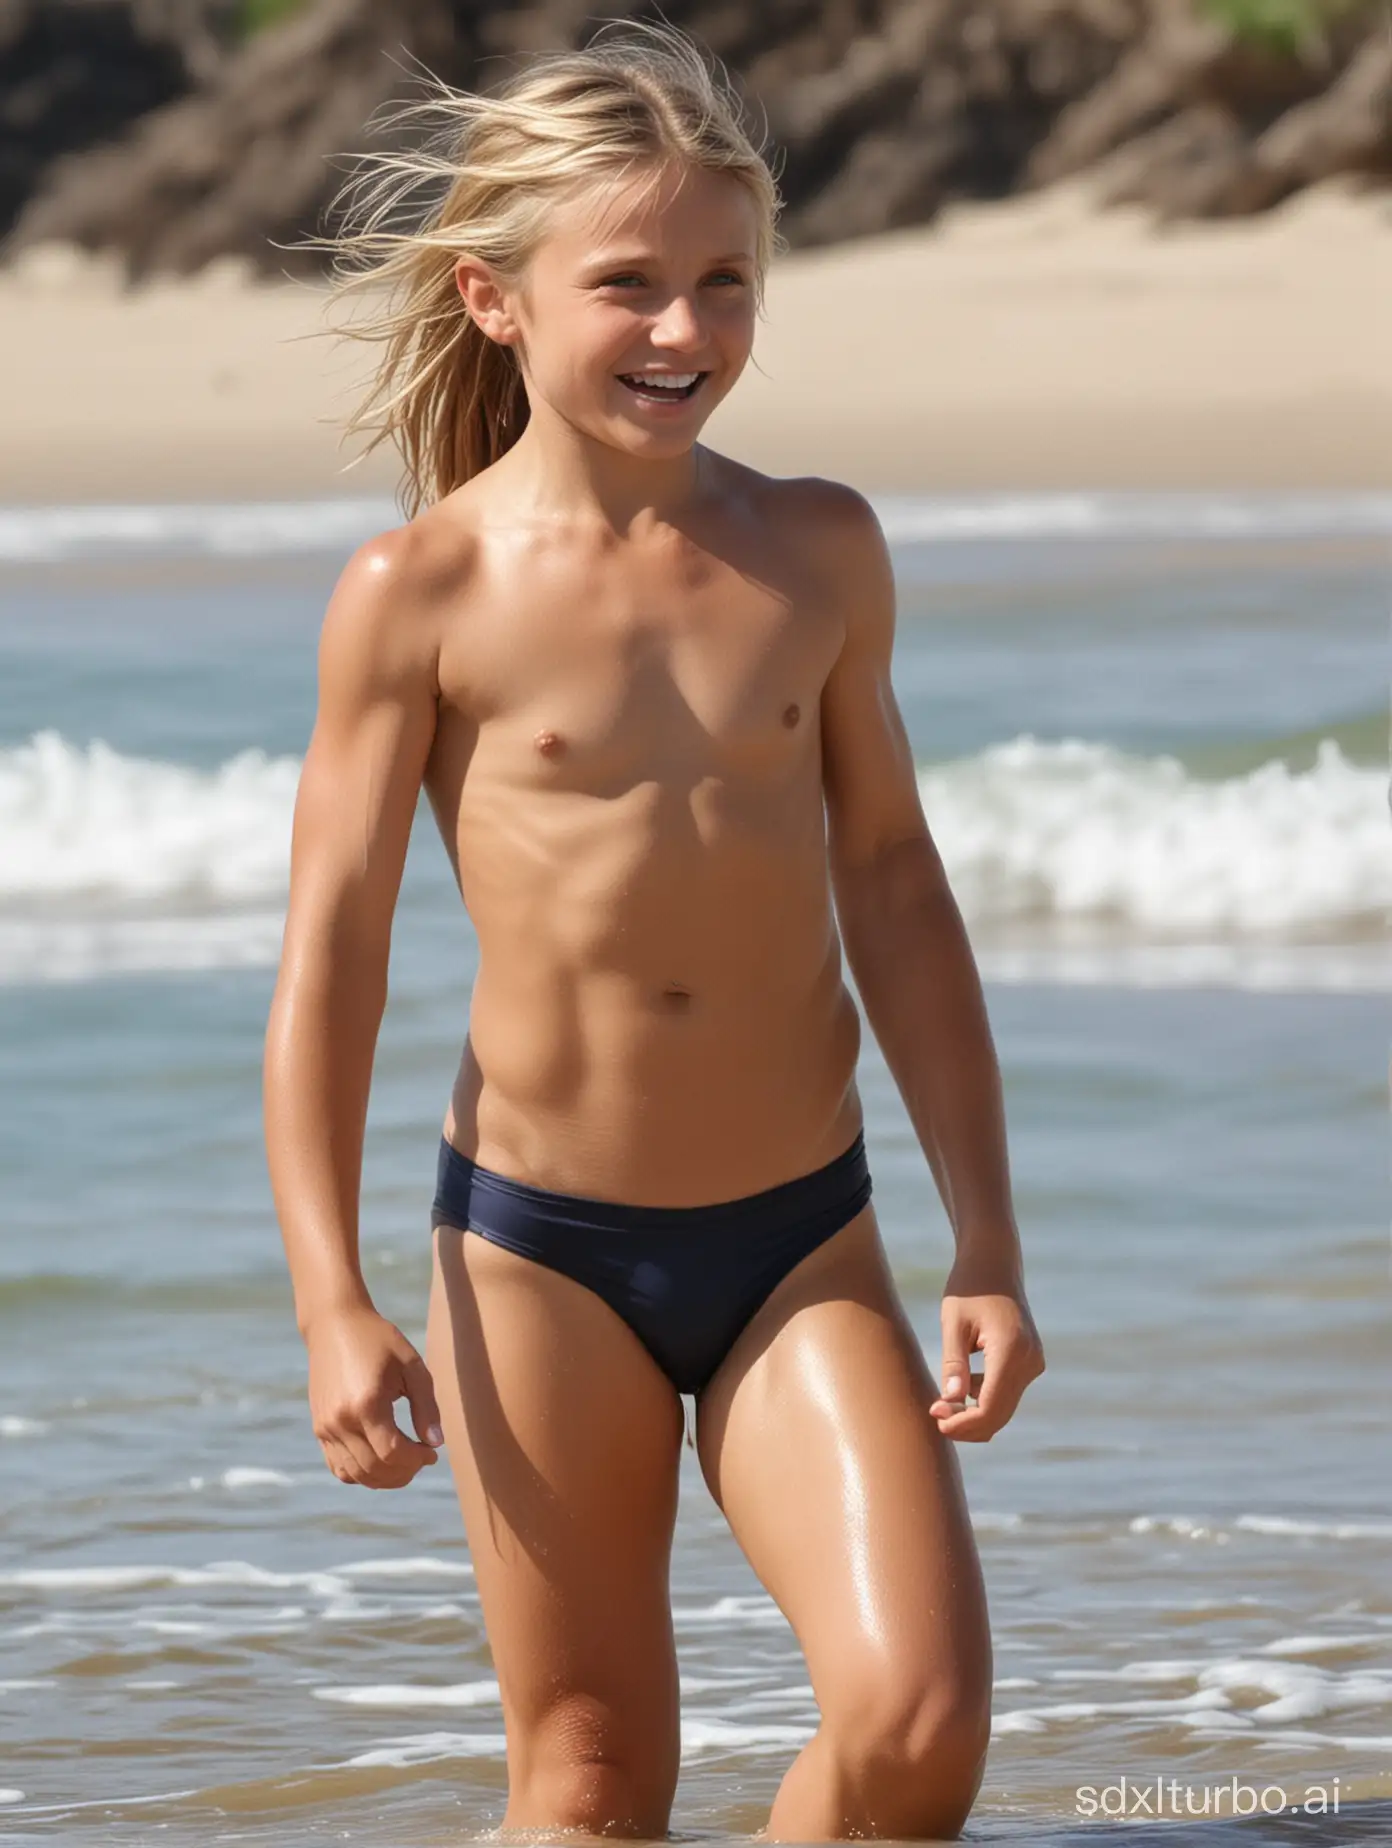 Young-Cameron-Diaz-with-Toned-Abs-Enjoying-Beach-Day